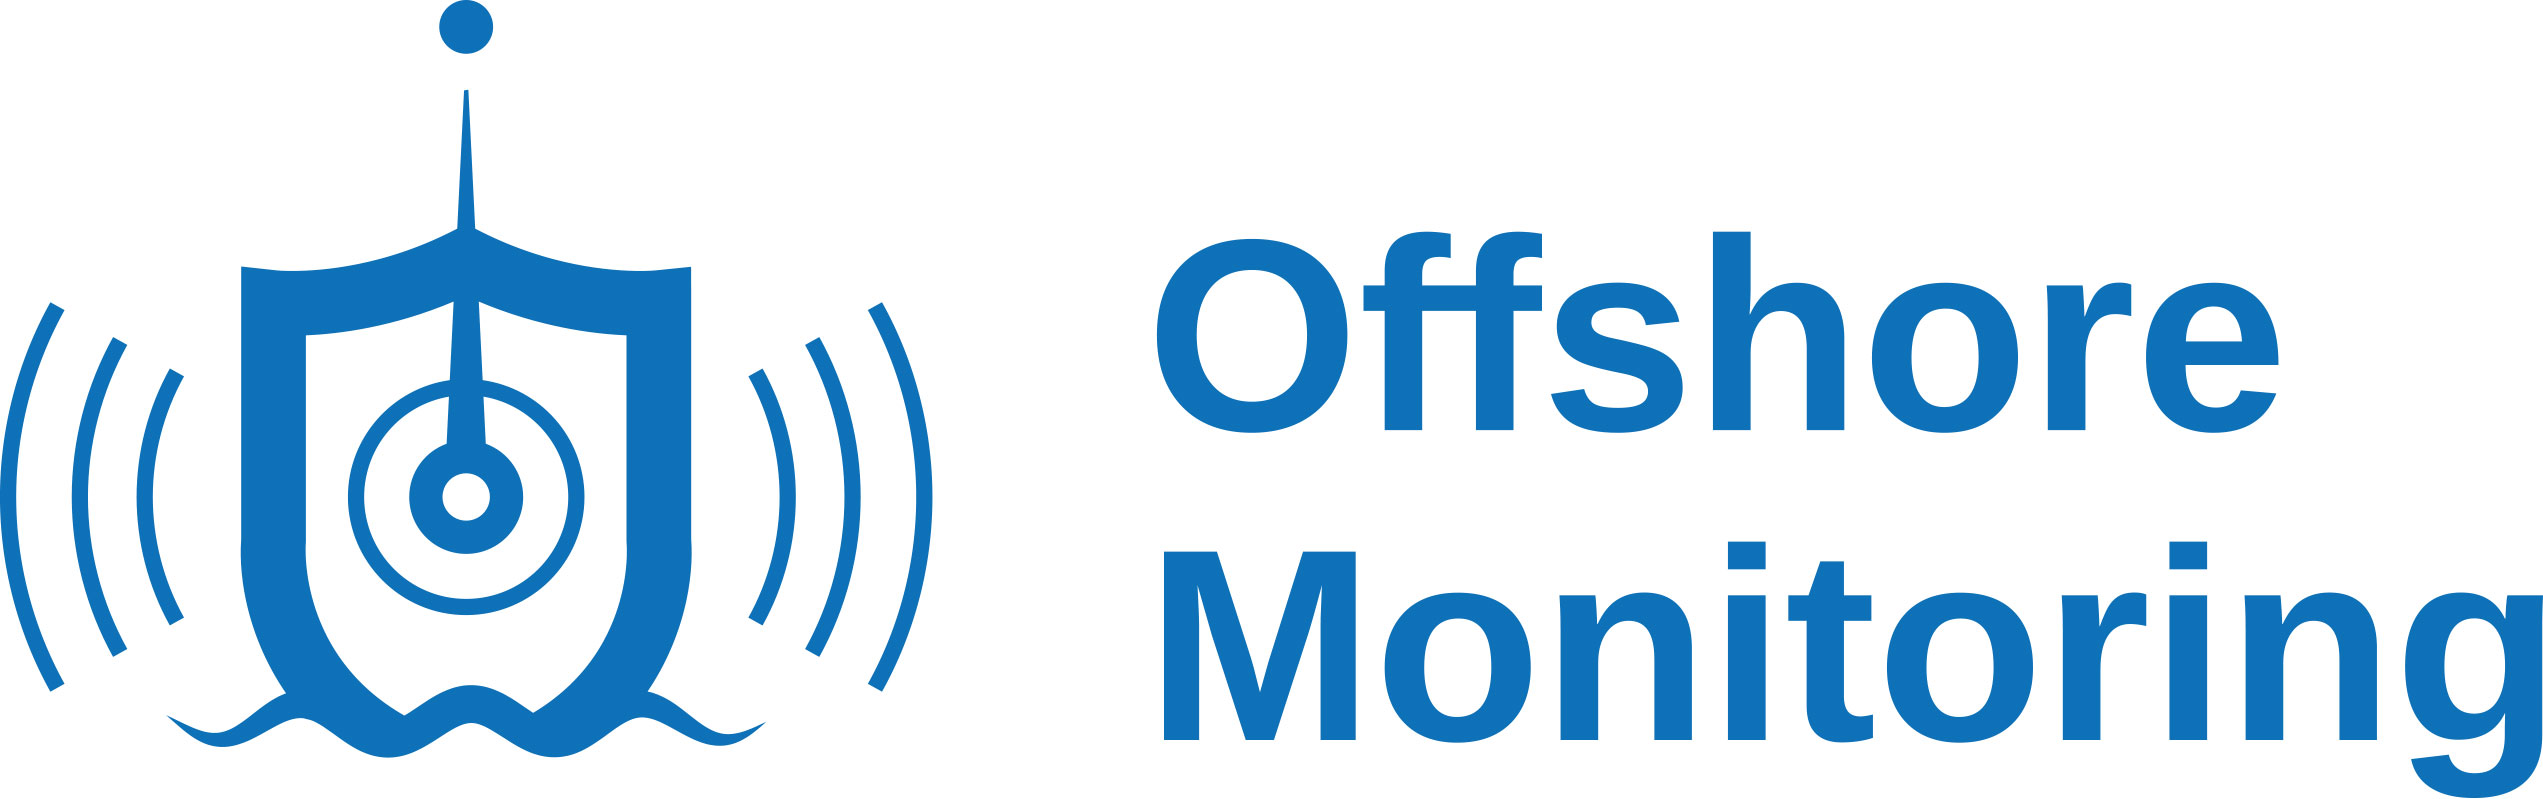 logo offshore monitoring blue small